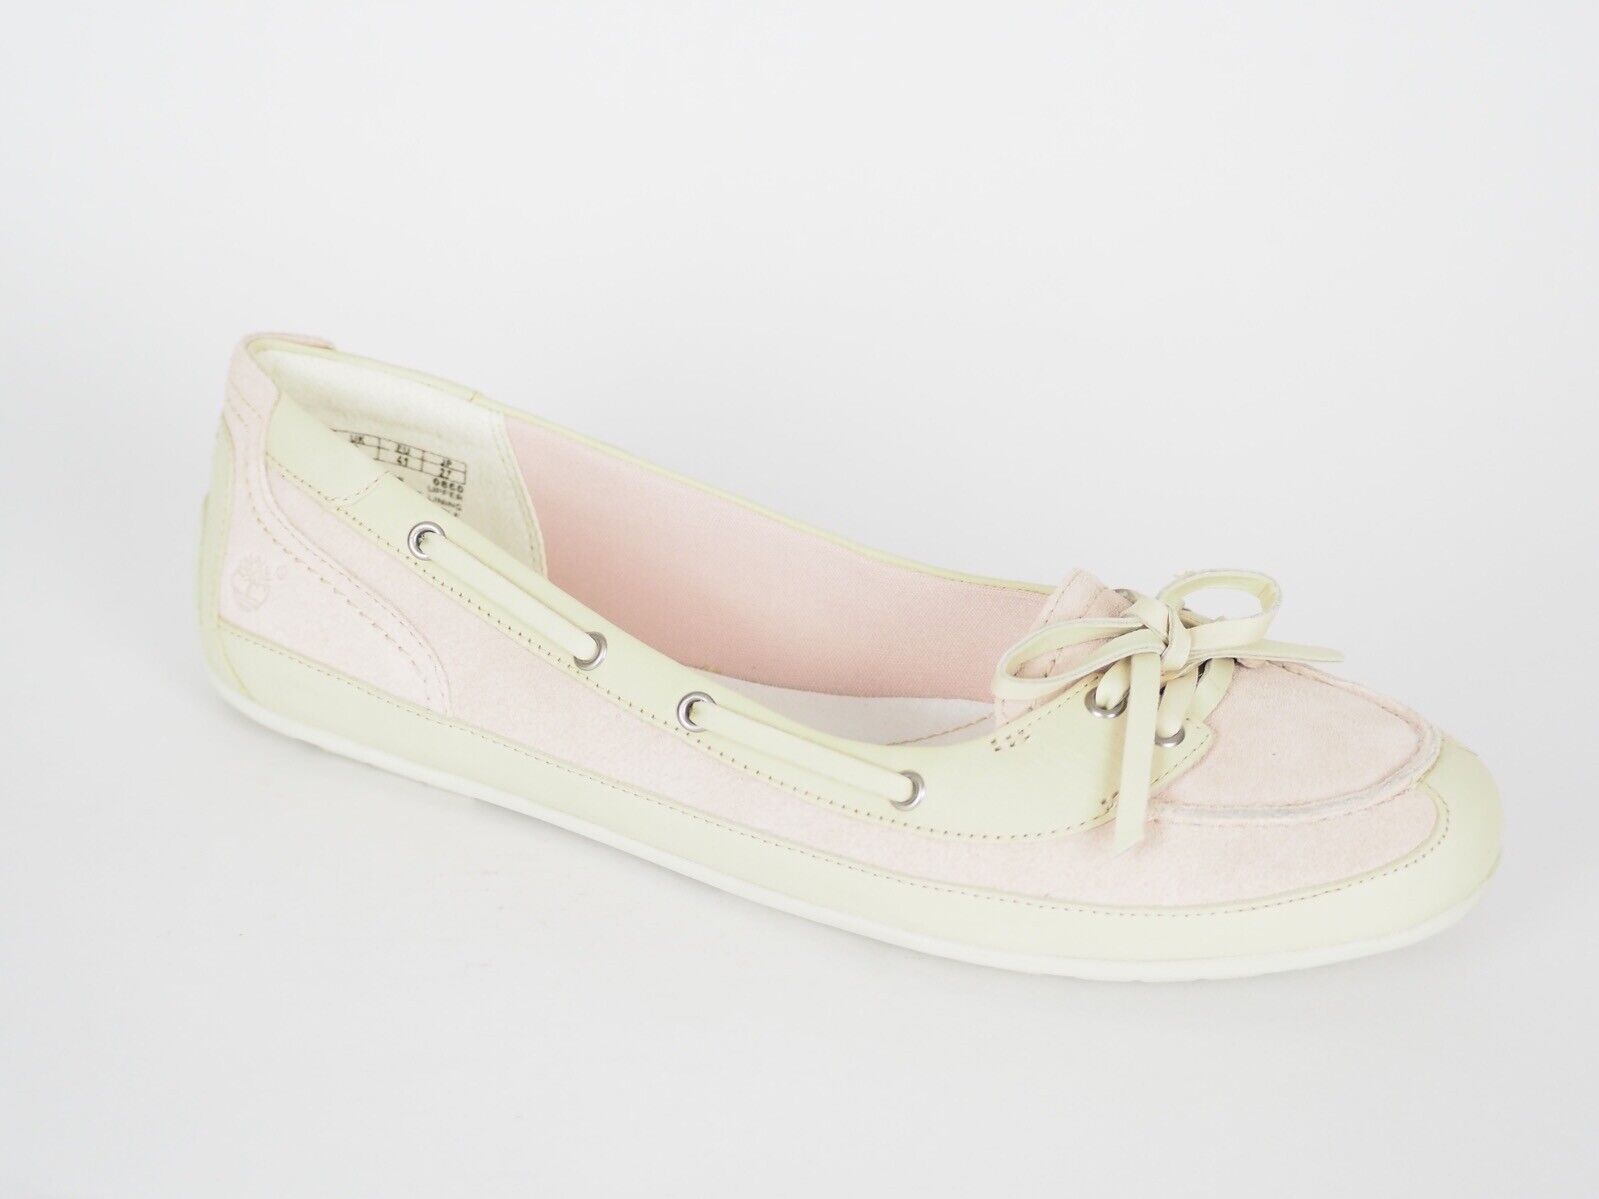 Womens Timberland EK Boothbay 3910R Pink Leather Ballerina Boat Shoes - London Top Style